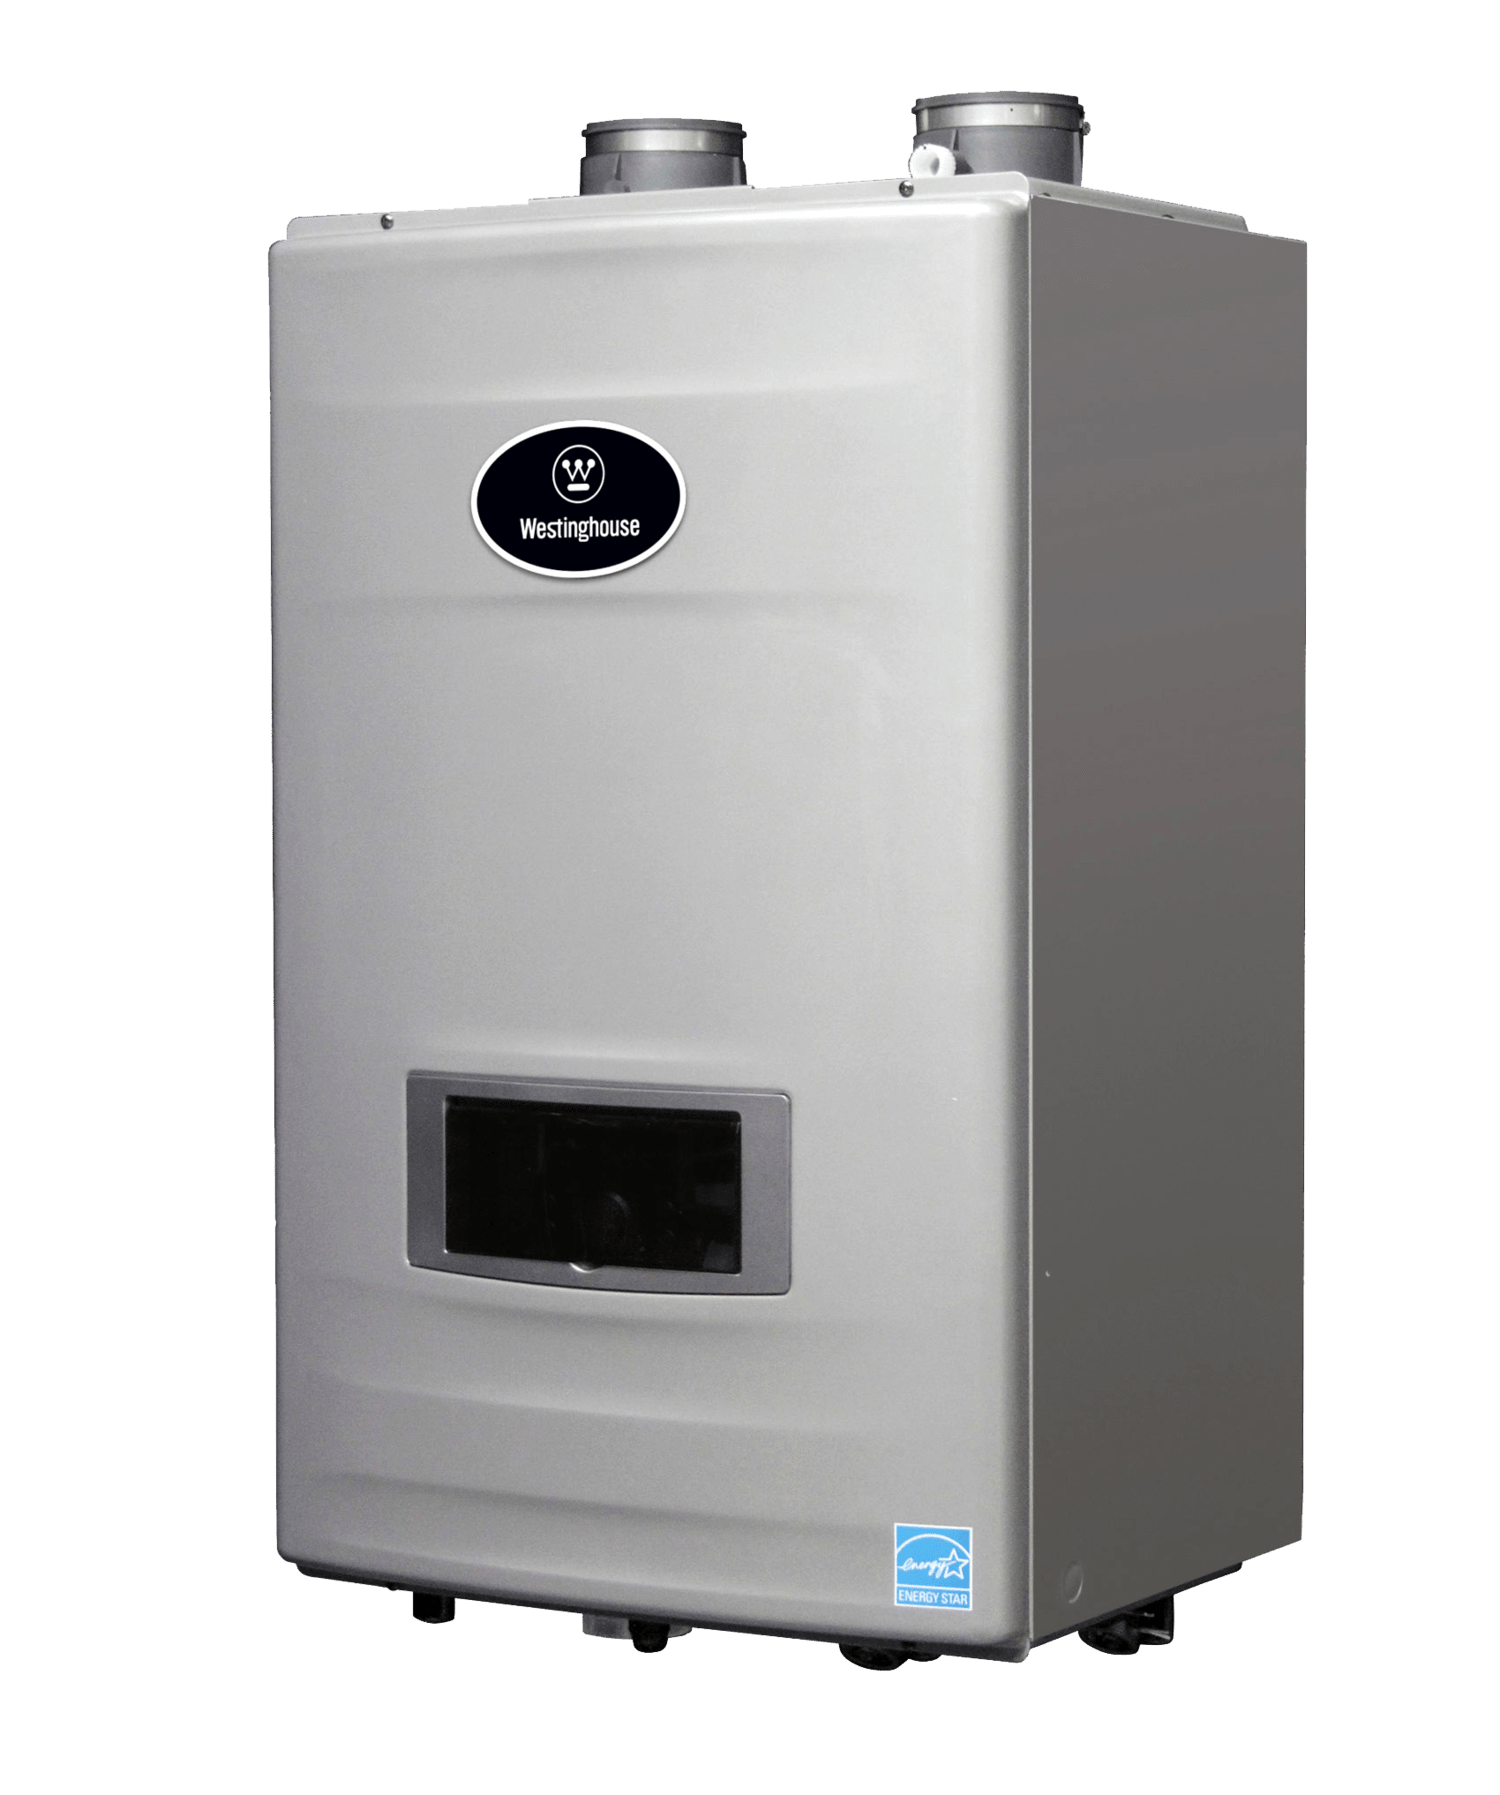 best-hybrid-water-heaters-of-2020-complete-buyer-s-guide-hvac-training-101